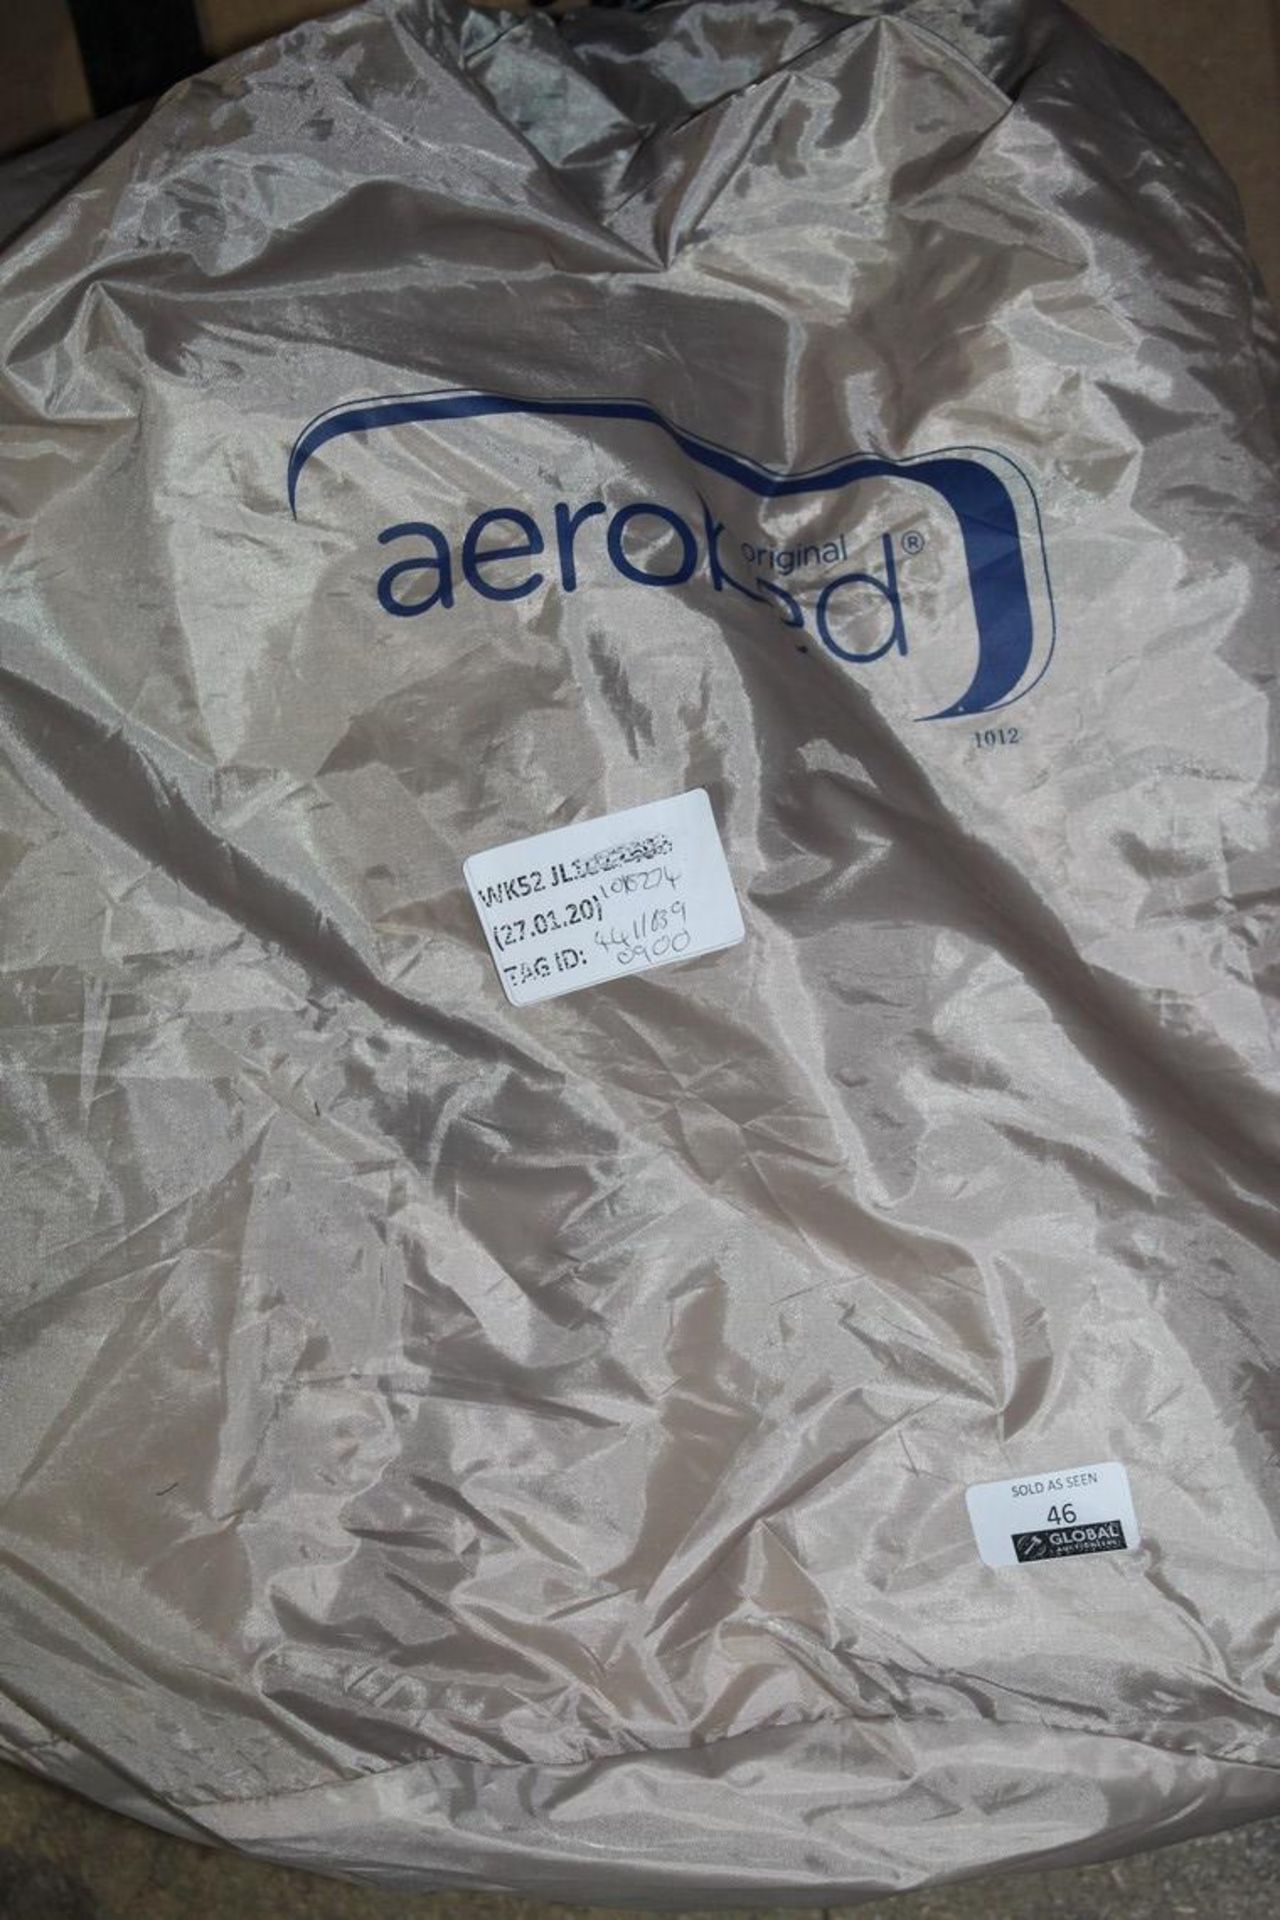 Original Aerobed Inflatable Air Mattress RRP £160 (4411639) (Public Viewing and Appraisals